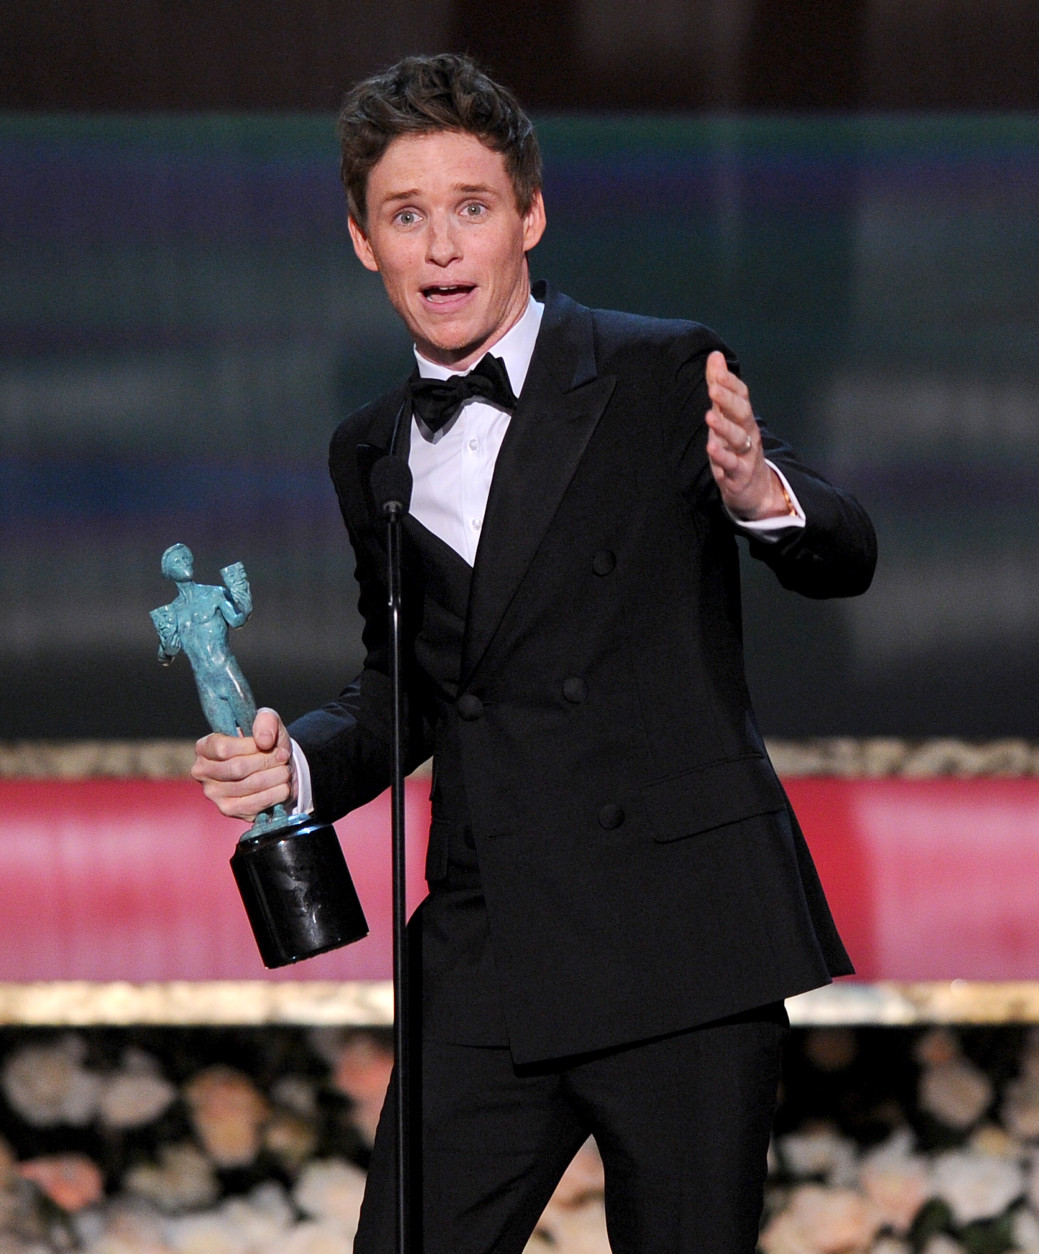 Eddie Redmayne accepts the award for outstanding performance by a male actor in a leading role for The Theory of Everything at the 21st annual Screen Actors Guild Awards at the Shrine Auditorium on Sunday, Jan. 25, 2015, in Los Angeles. (Photo by Vince Bucci/Invision/AP)